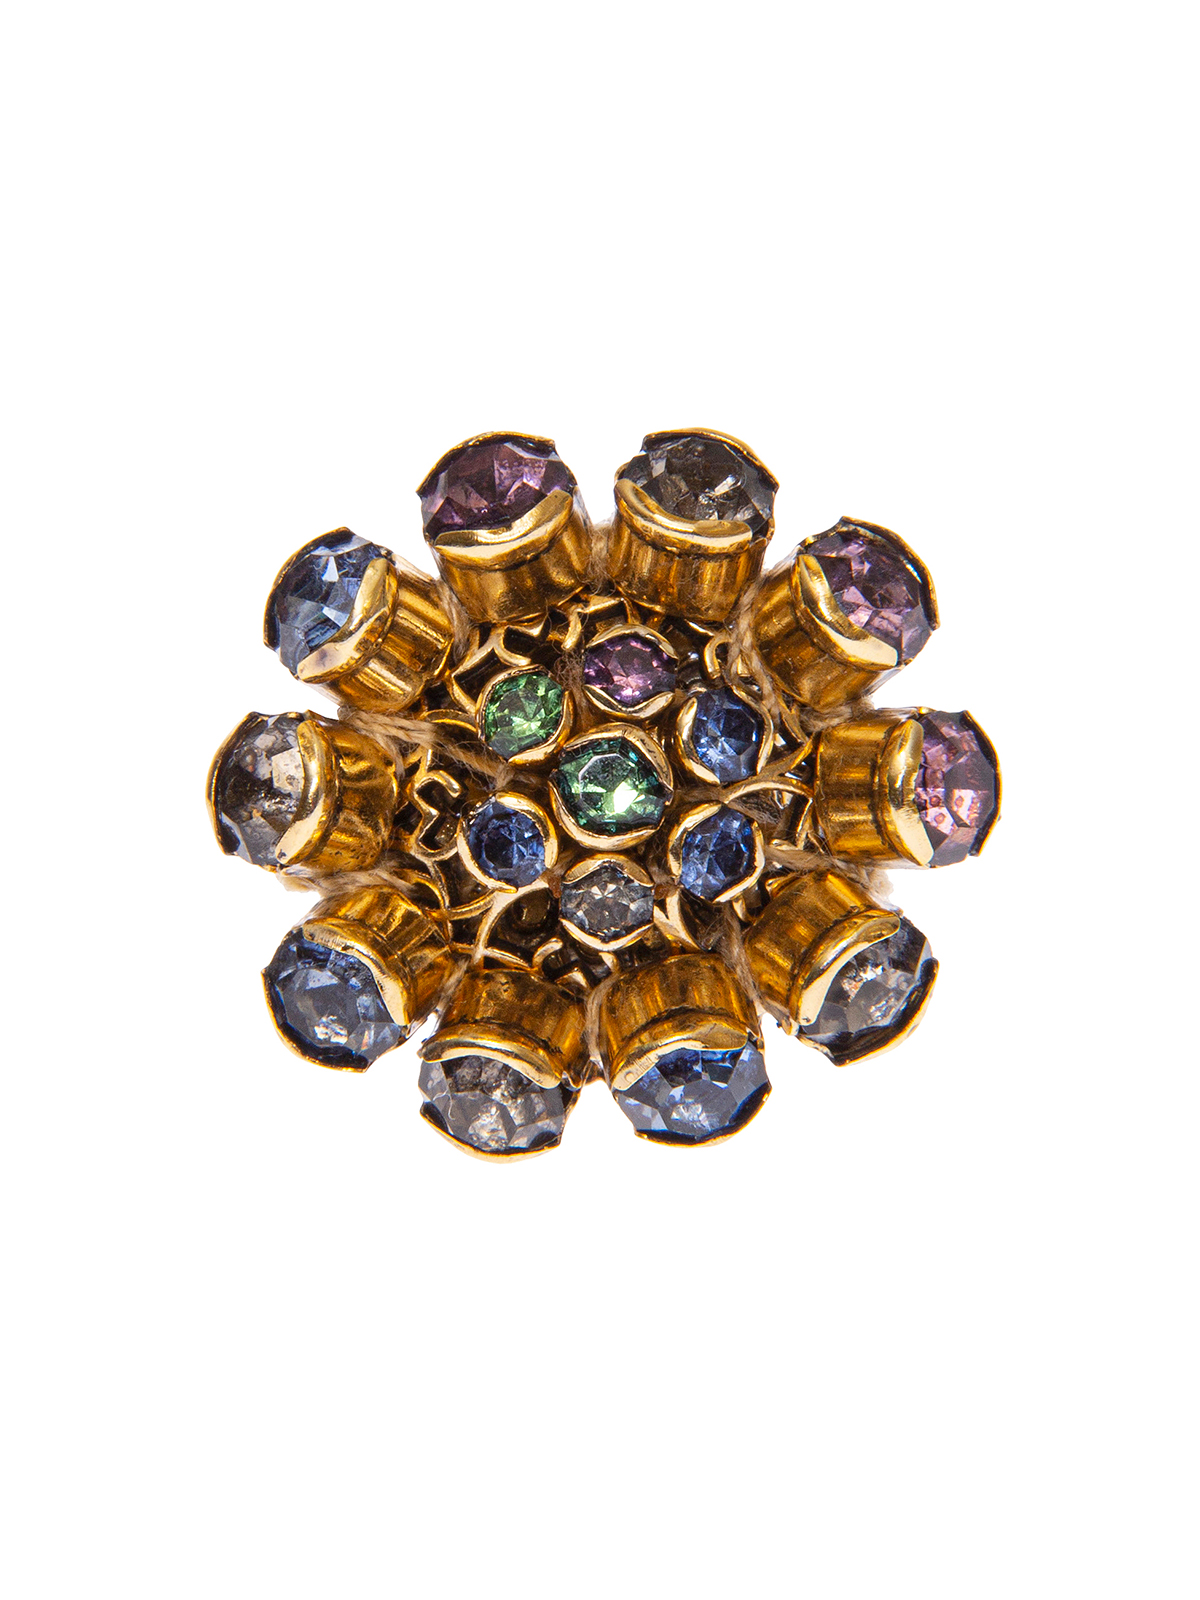 Flower ring embellished with multicolor stones